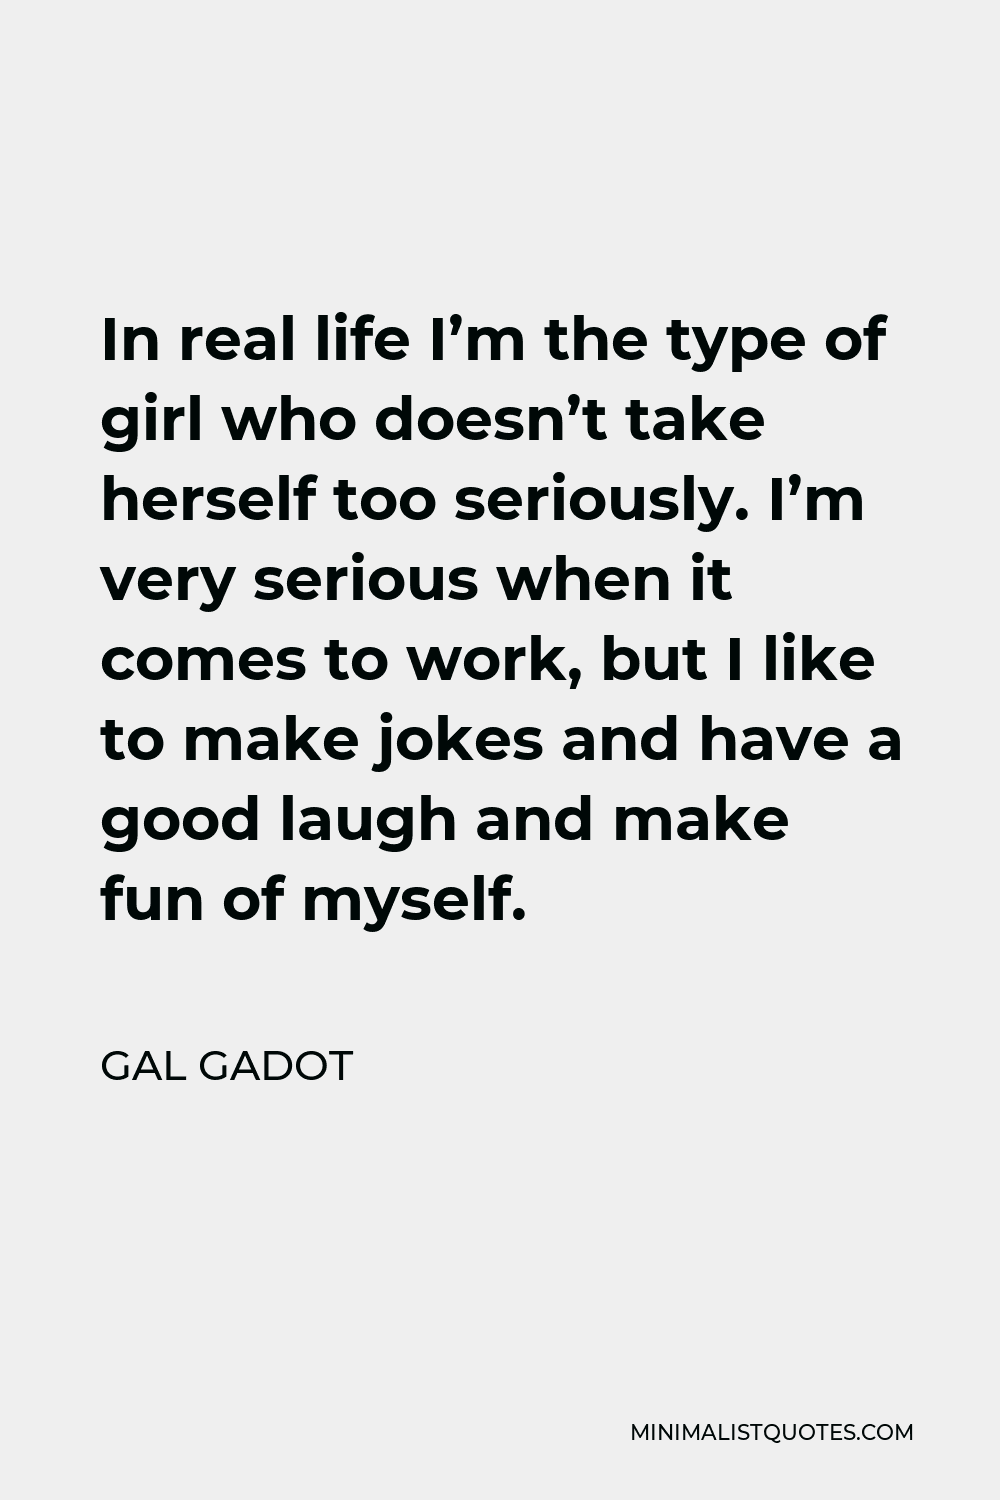 Gal Gadot Quote - In real life I’m the type of girl who doesn’t take herself too seriously. I’m very serious when it comes to work, but I like to make jokes and have a good laugh and make fun of myself.